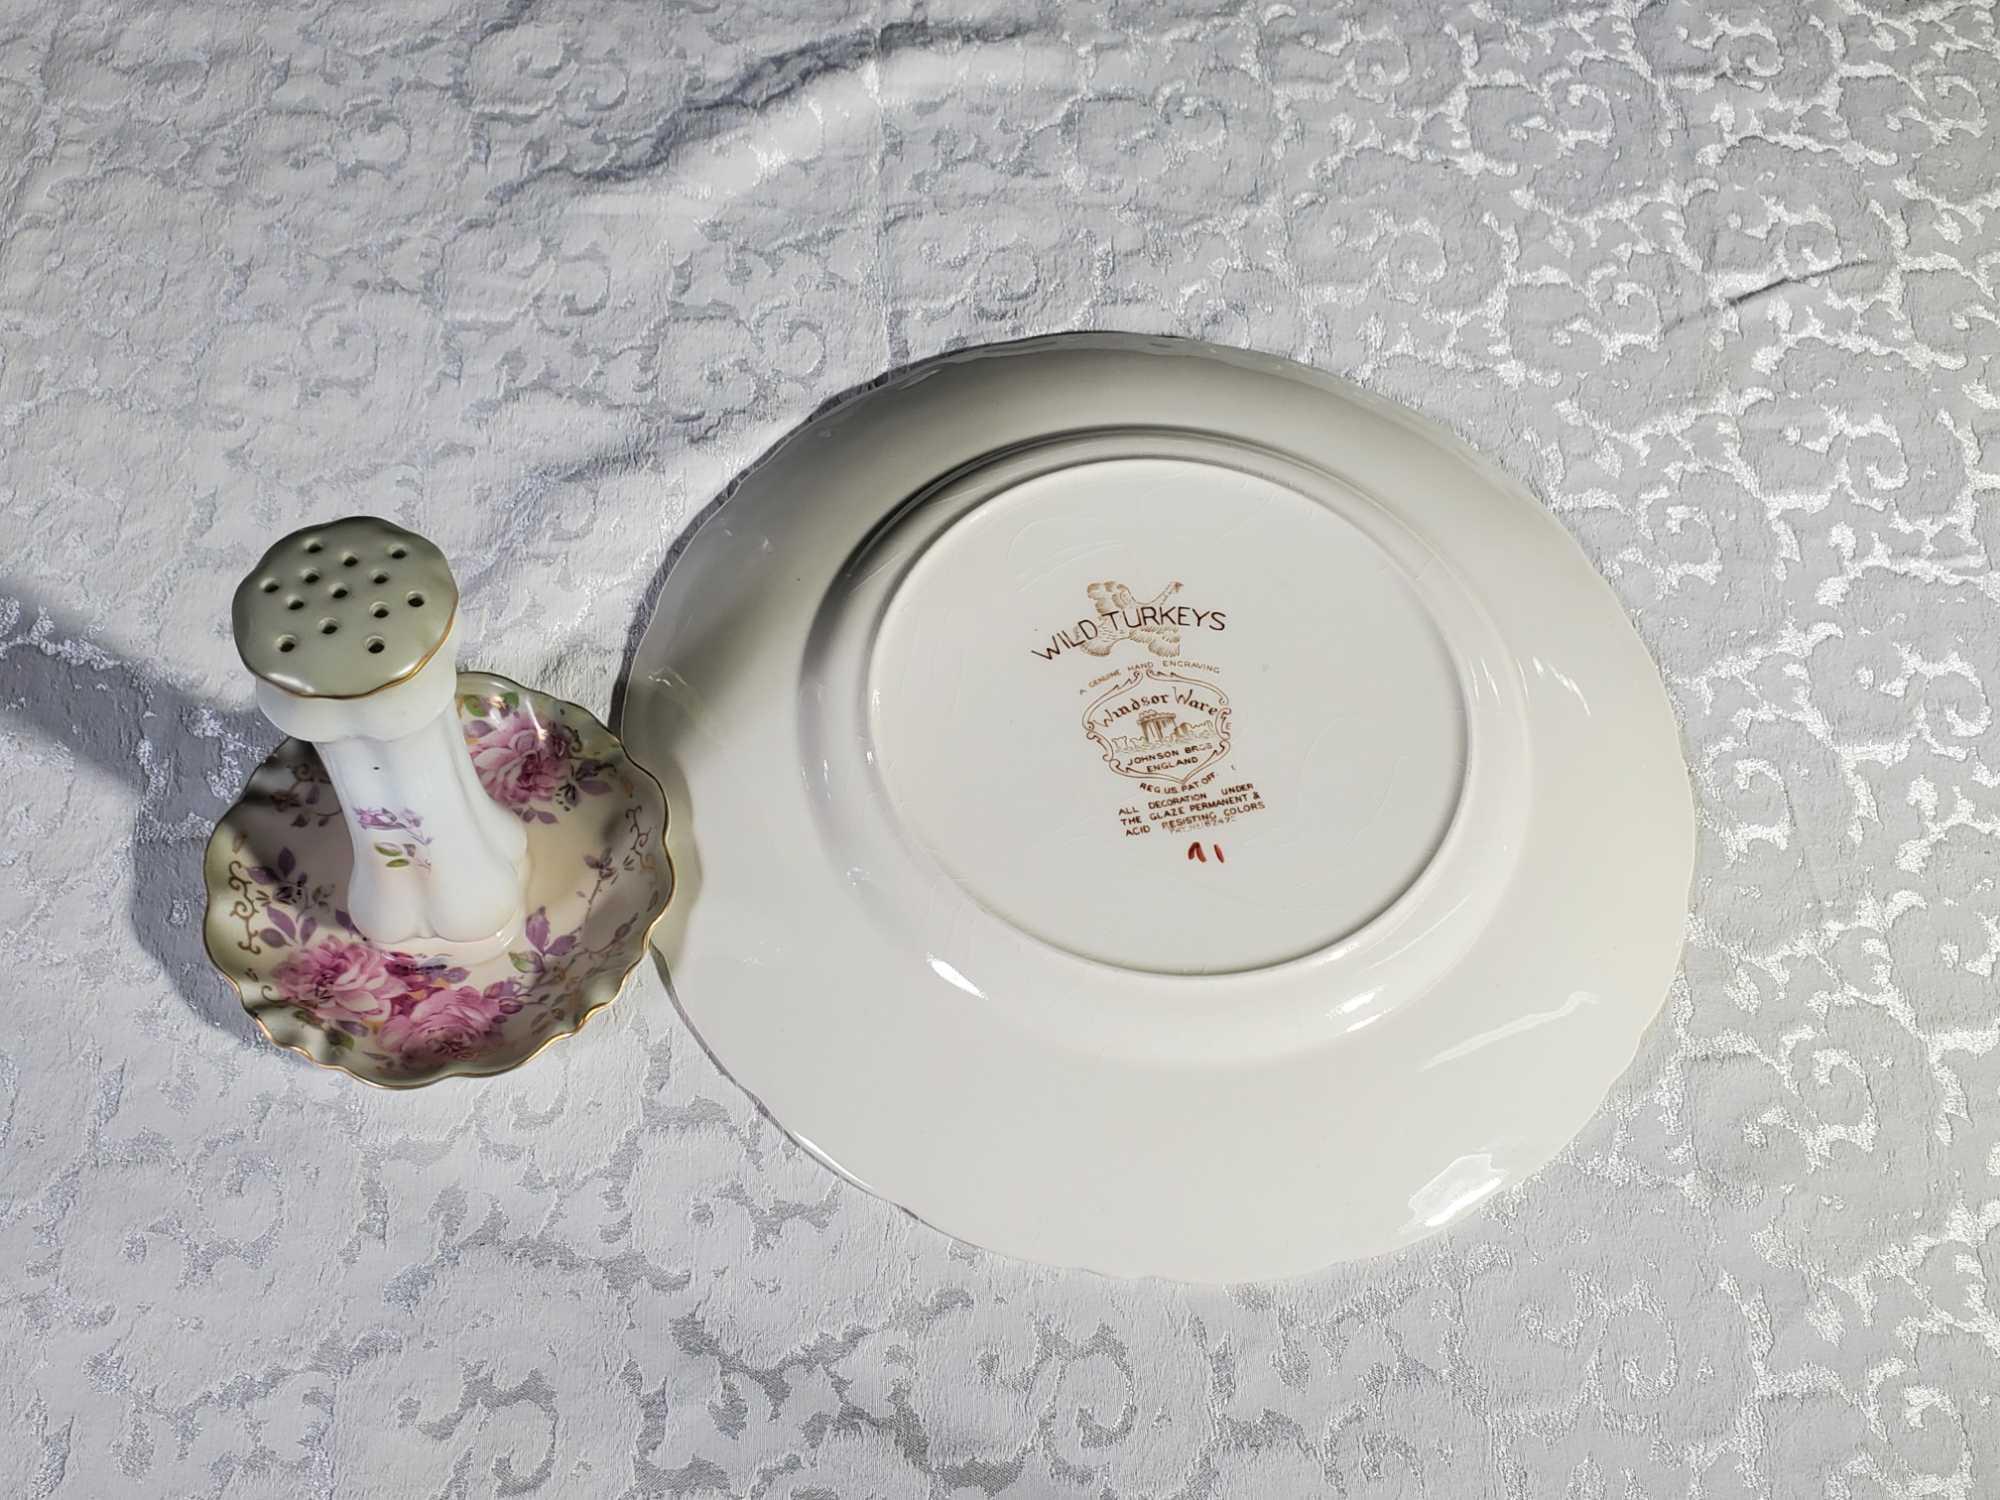 6 Pcs Decorated Porcelain Table and Kitchenware Accents